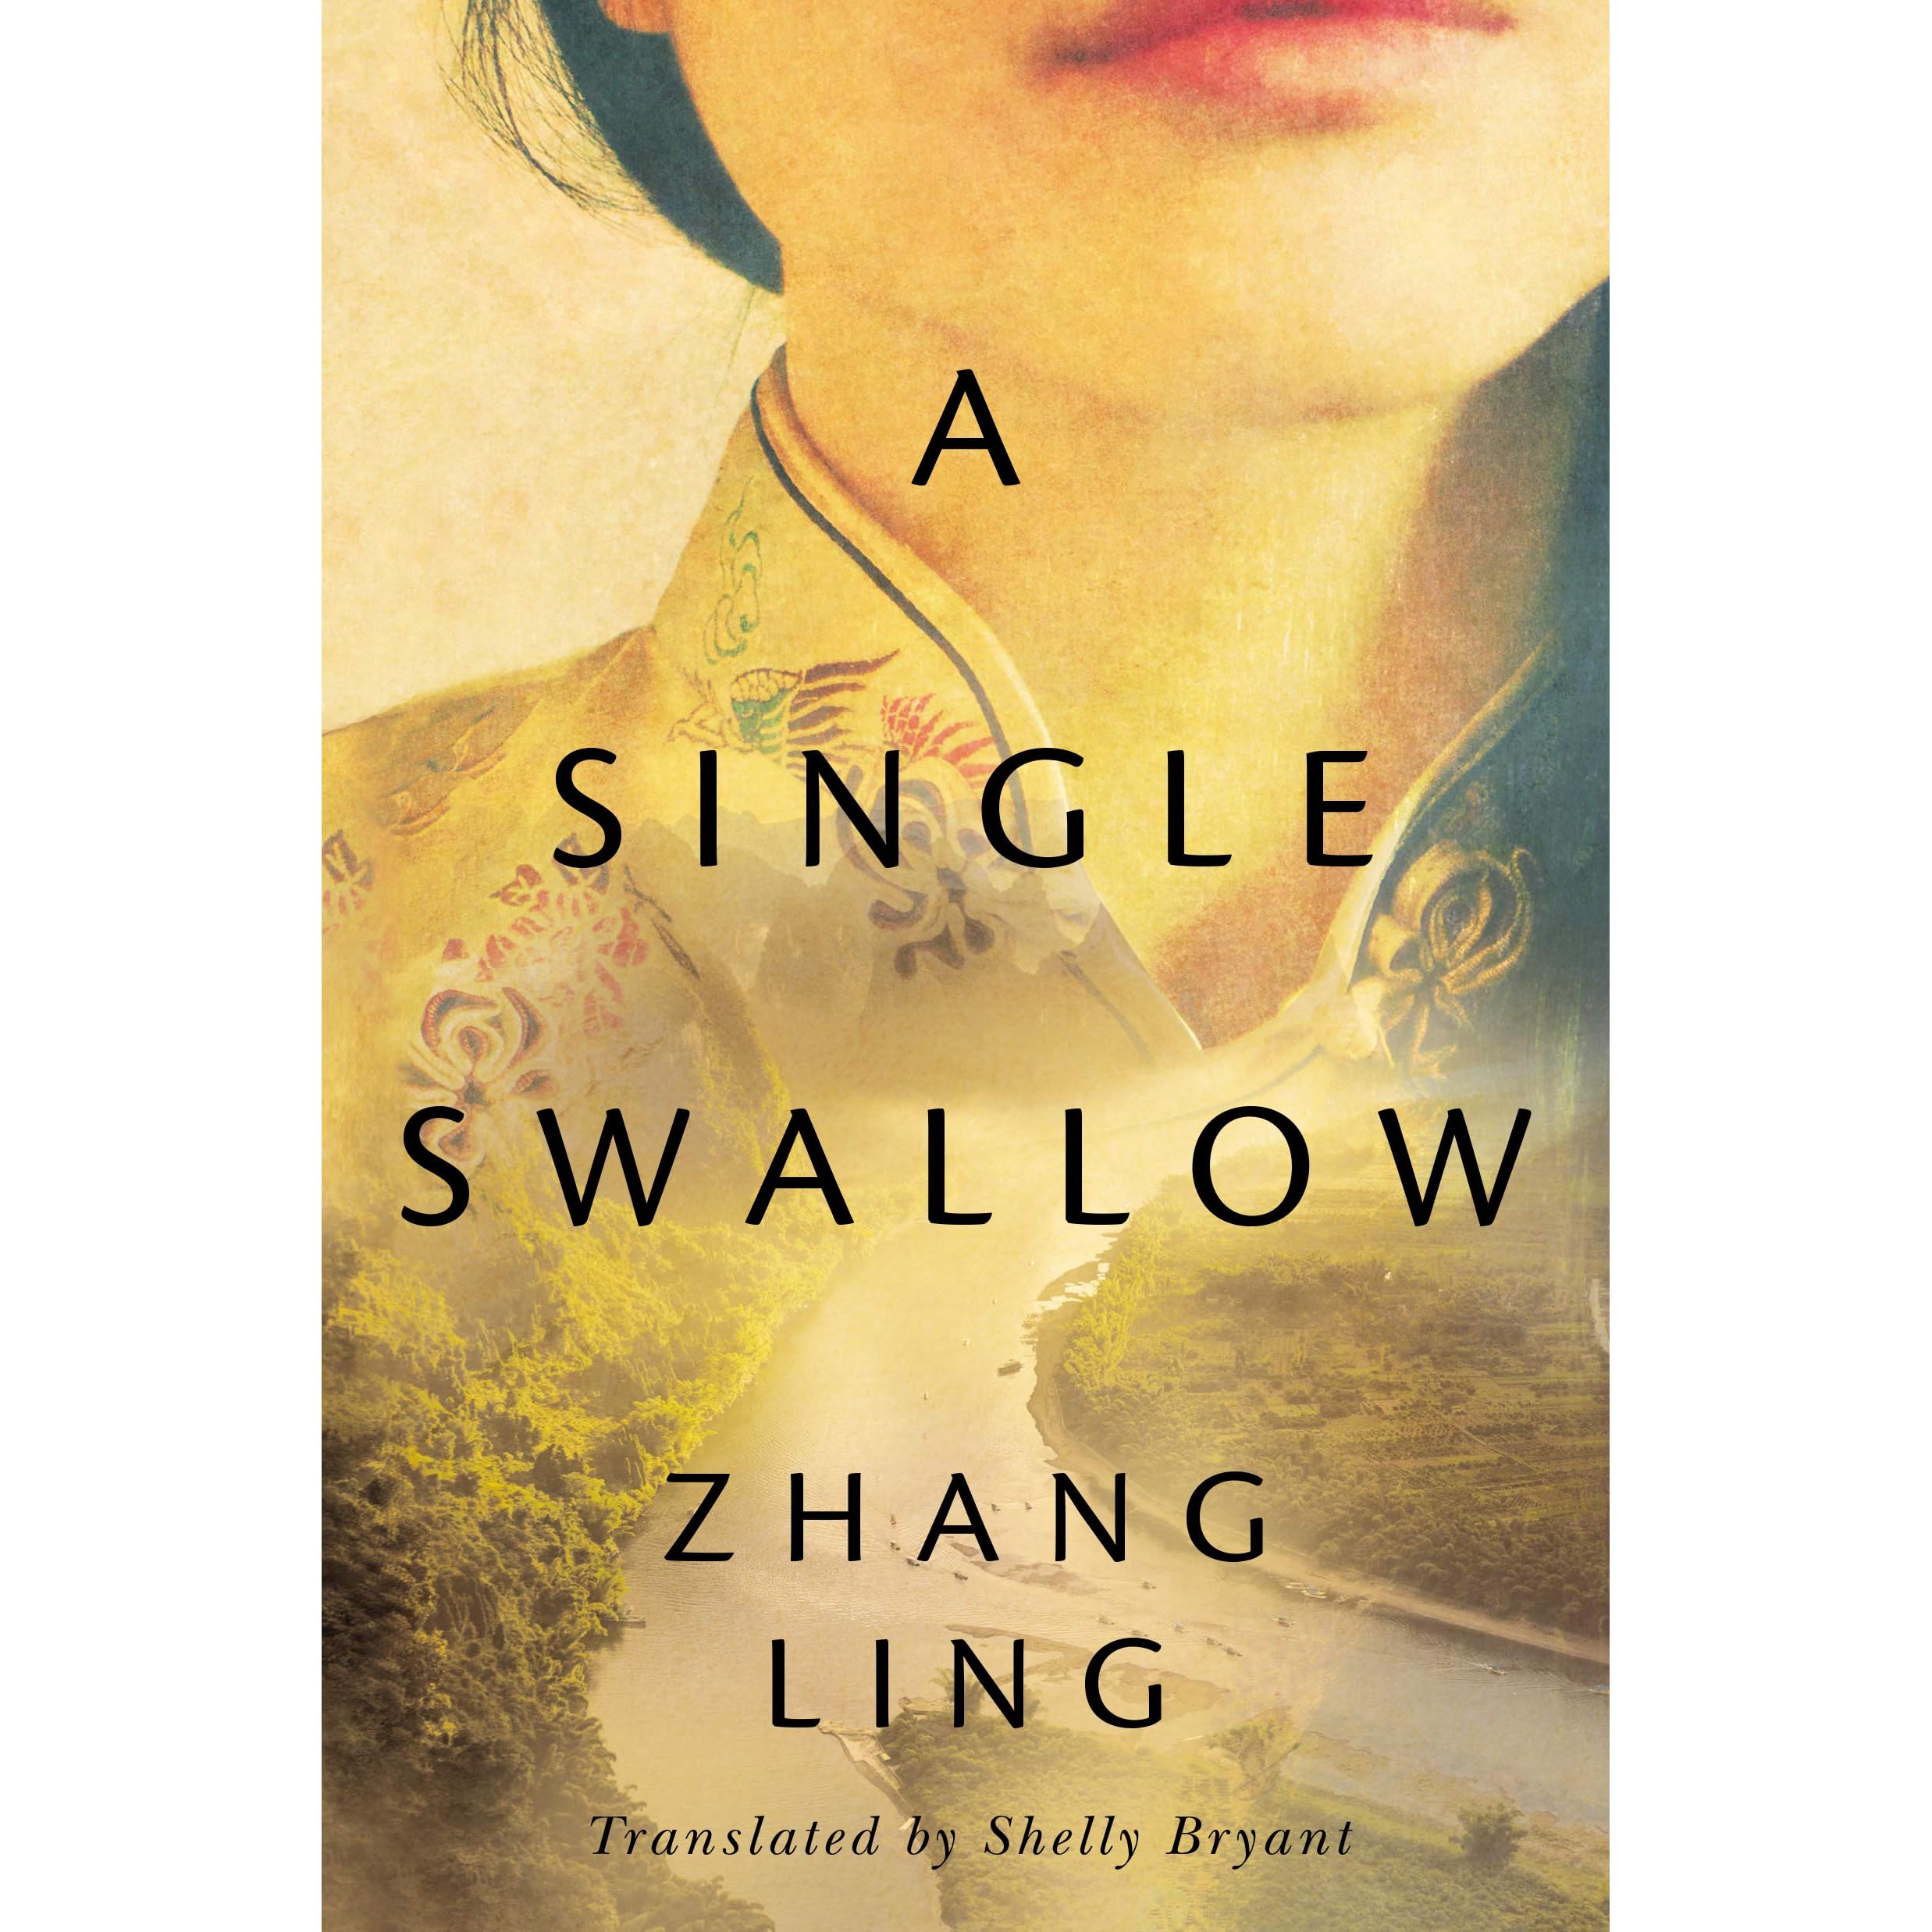 A Single Swallow by Ling Zhang